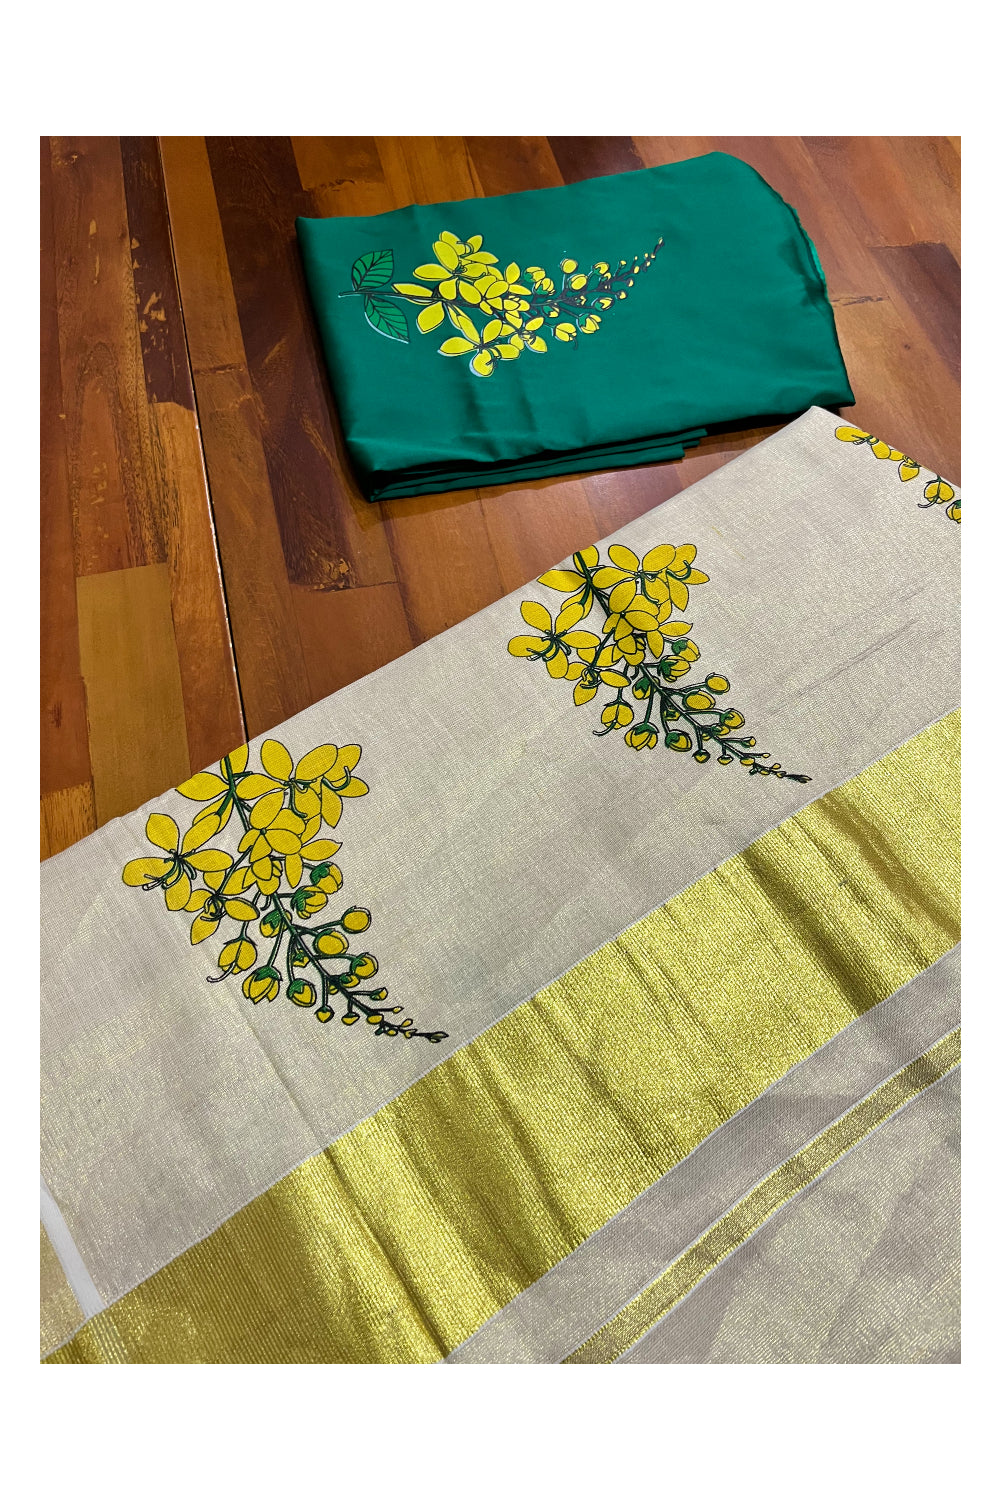 Kerala Tissue Kasavu Saree with Floral Prints on Body With Seperate Floral Printed Blouse